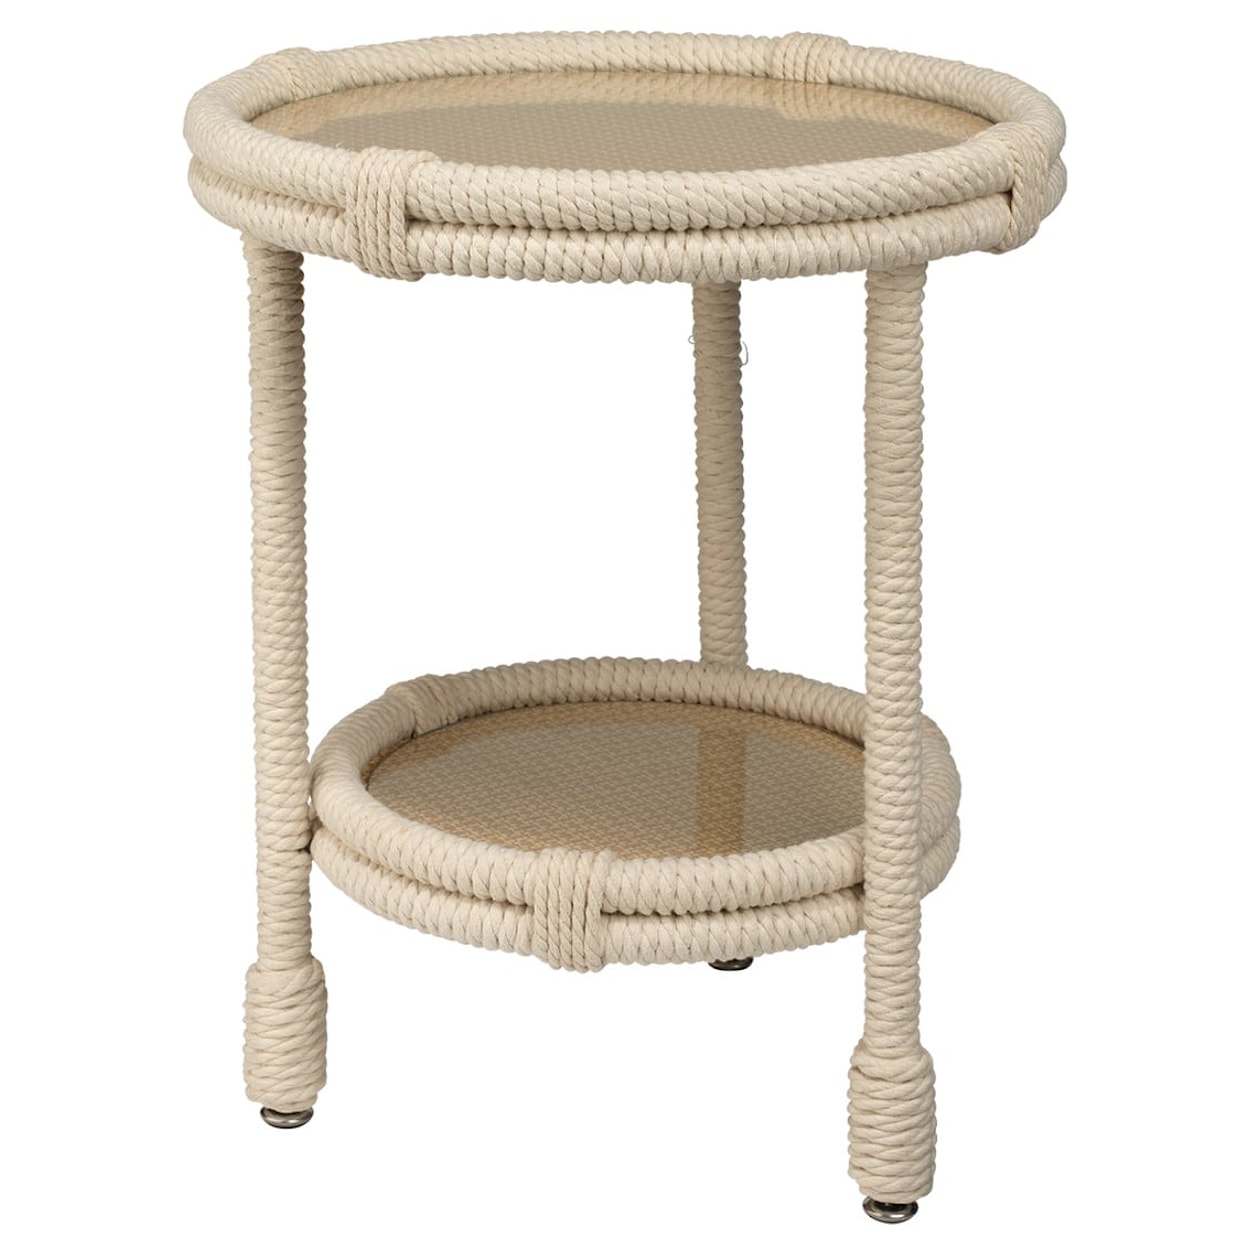 Jamie Young Co. Coastal Furniture DELTA SIDE TABLE- D